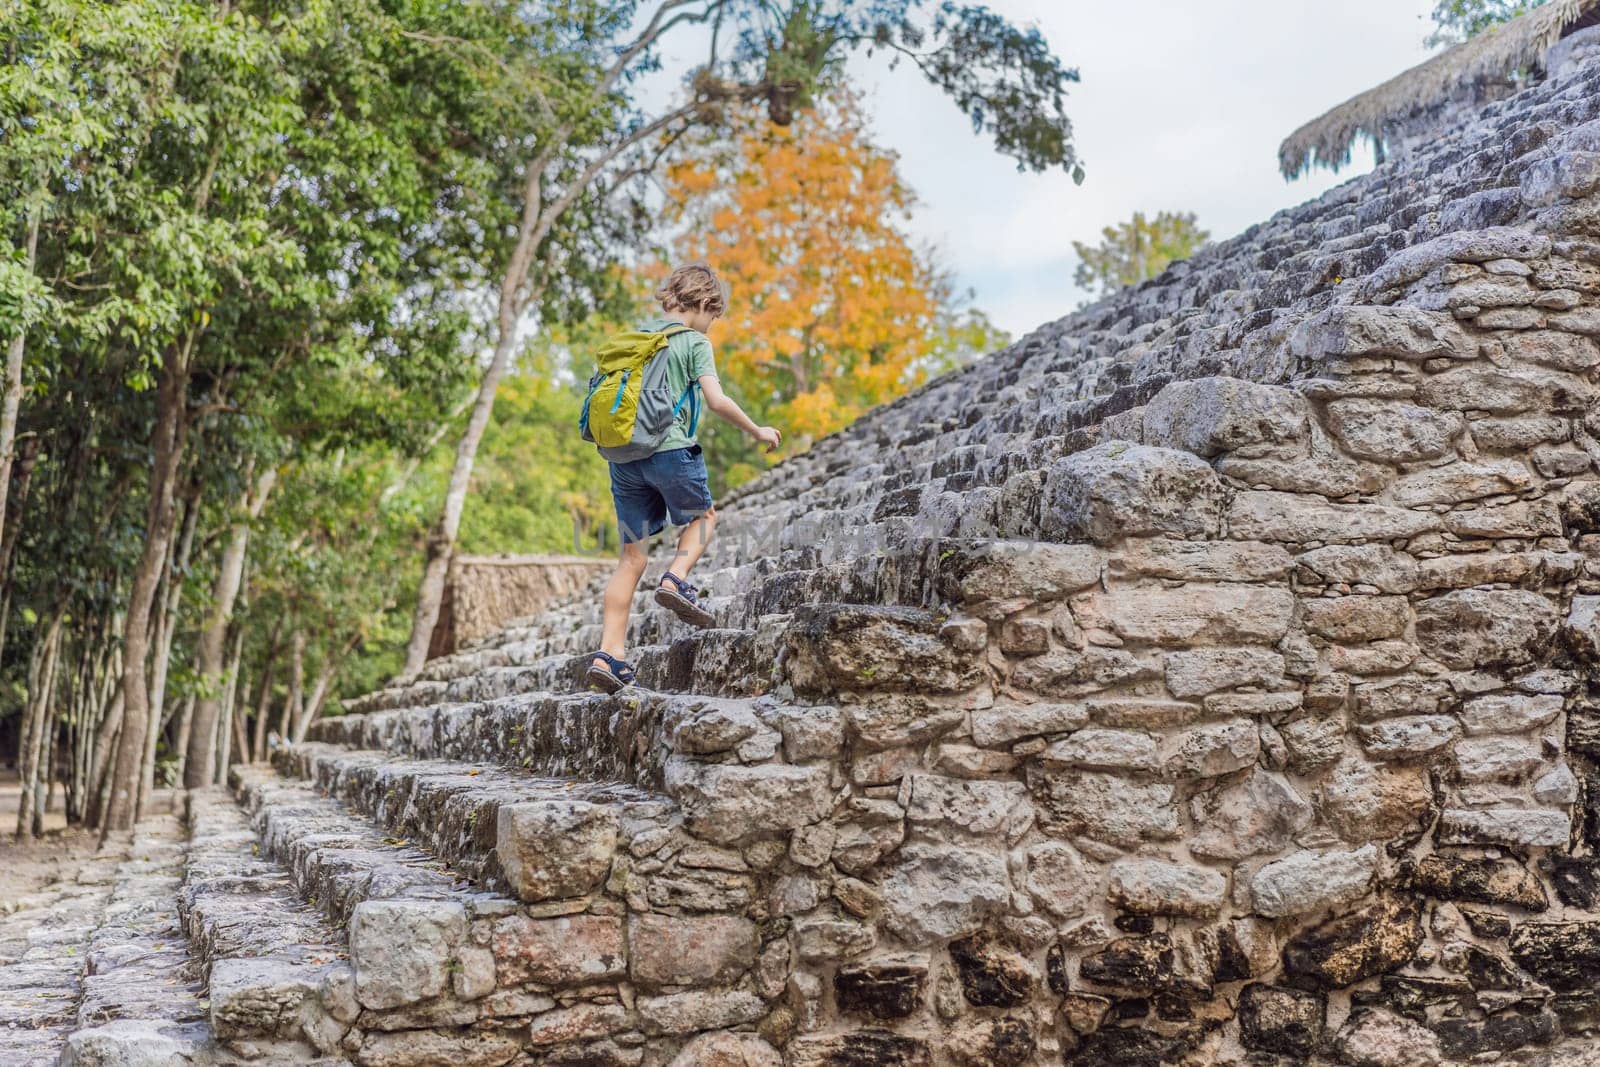 Boy tourist at Coba, Mexico. Ancient mayan city in Mexico. Coba is an archaeological area and a famous landmark of Yucatan Peninsula. Cloudy sky over a pyramid in Mexico.